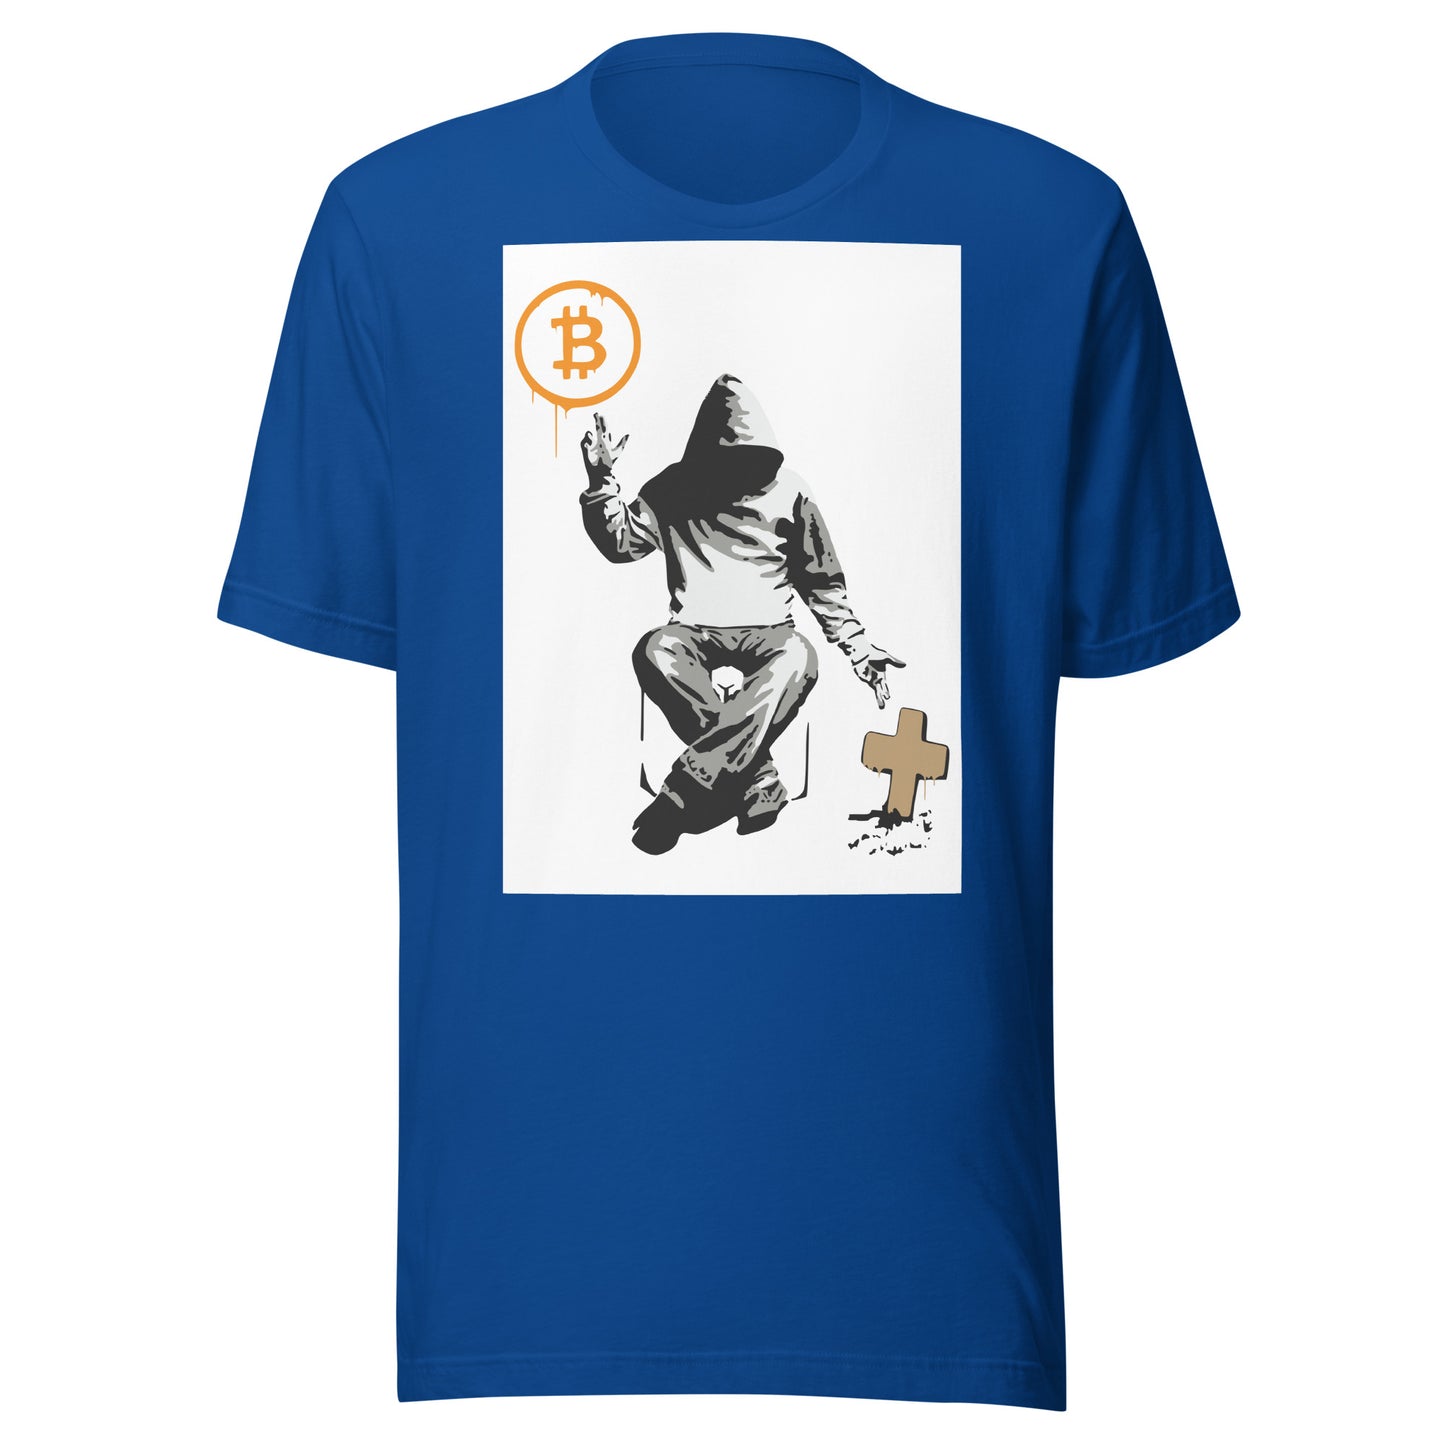 Bitcoin or Die